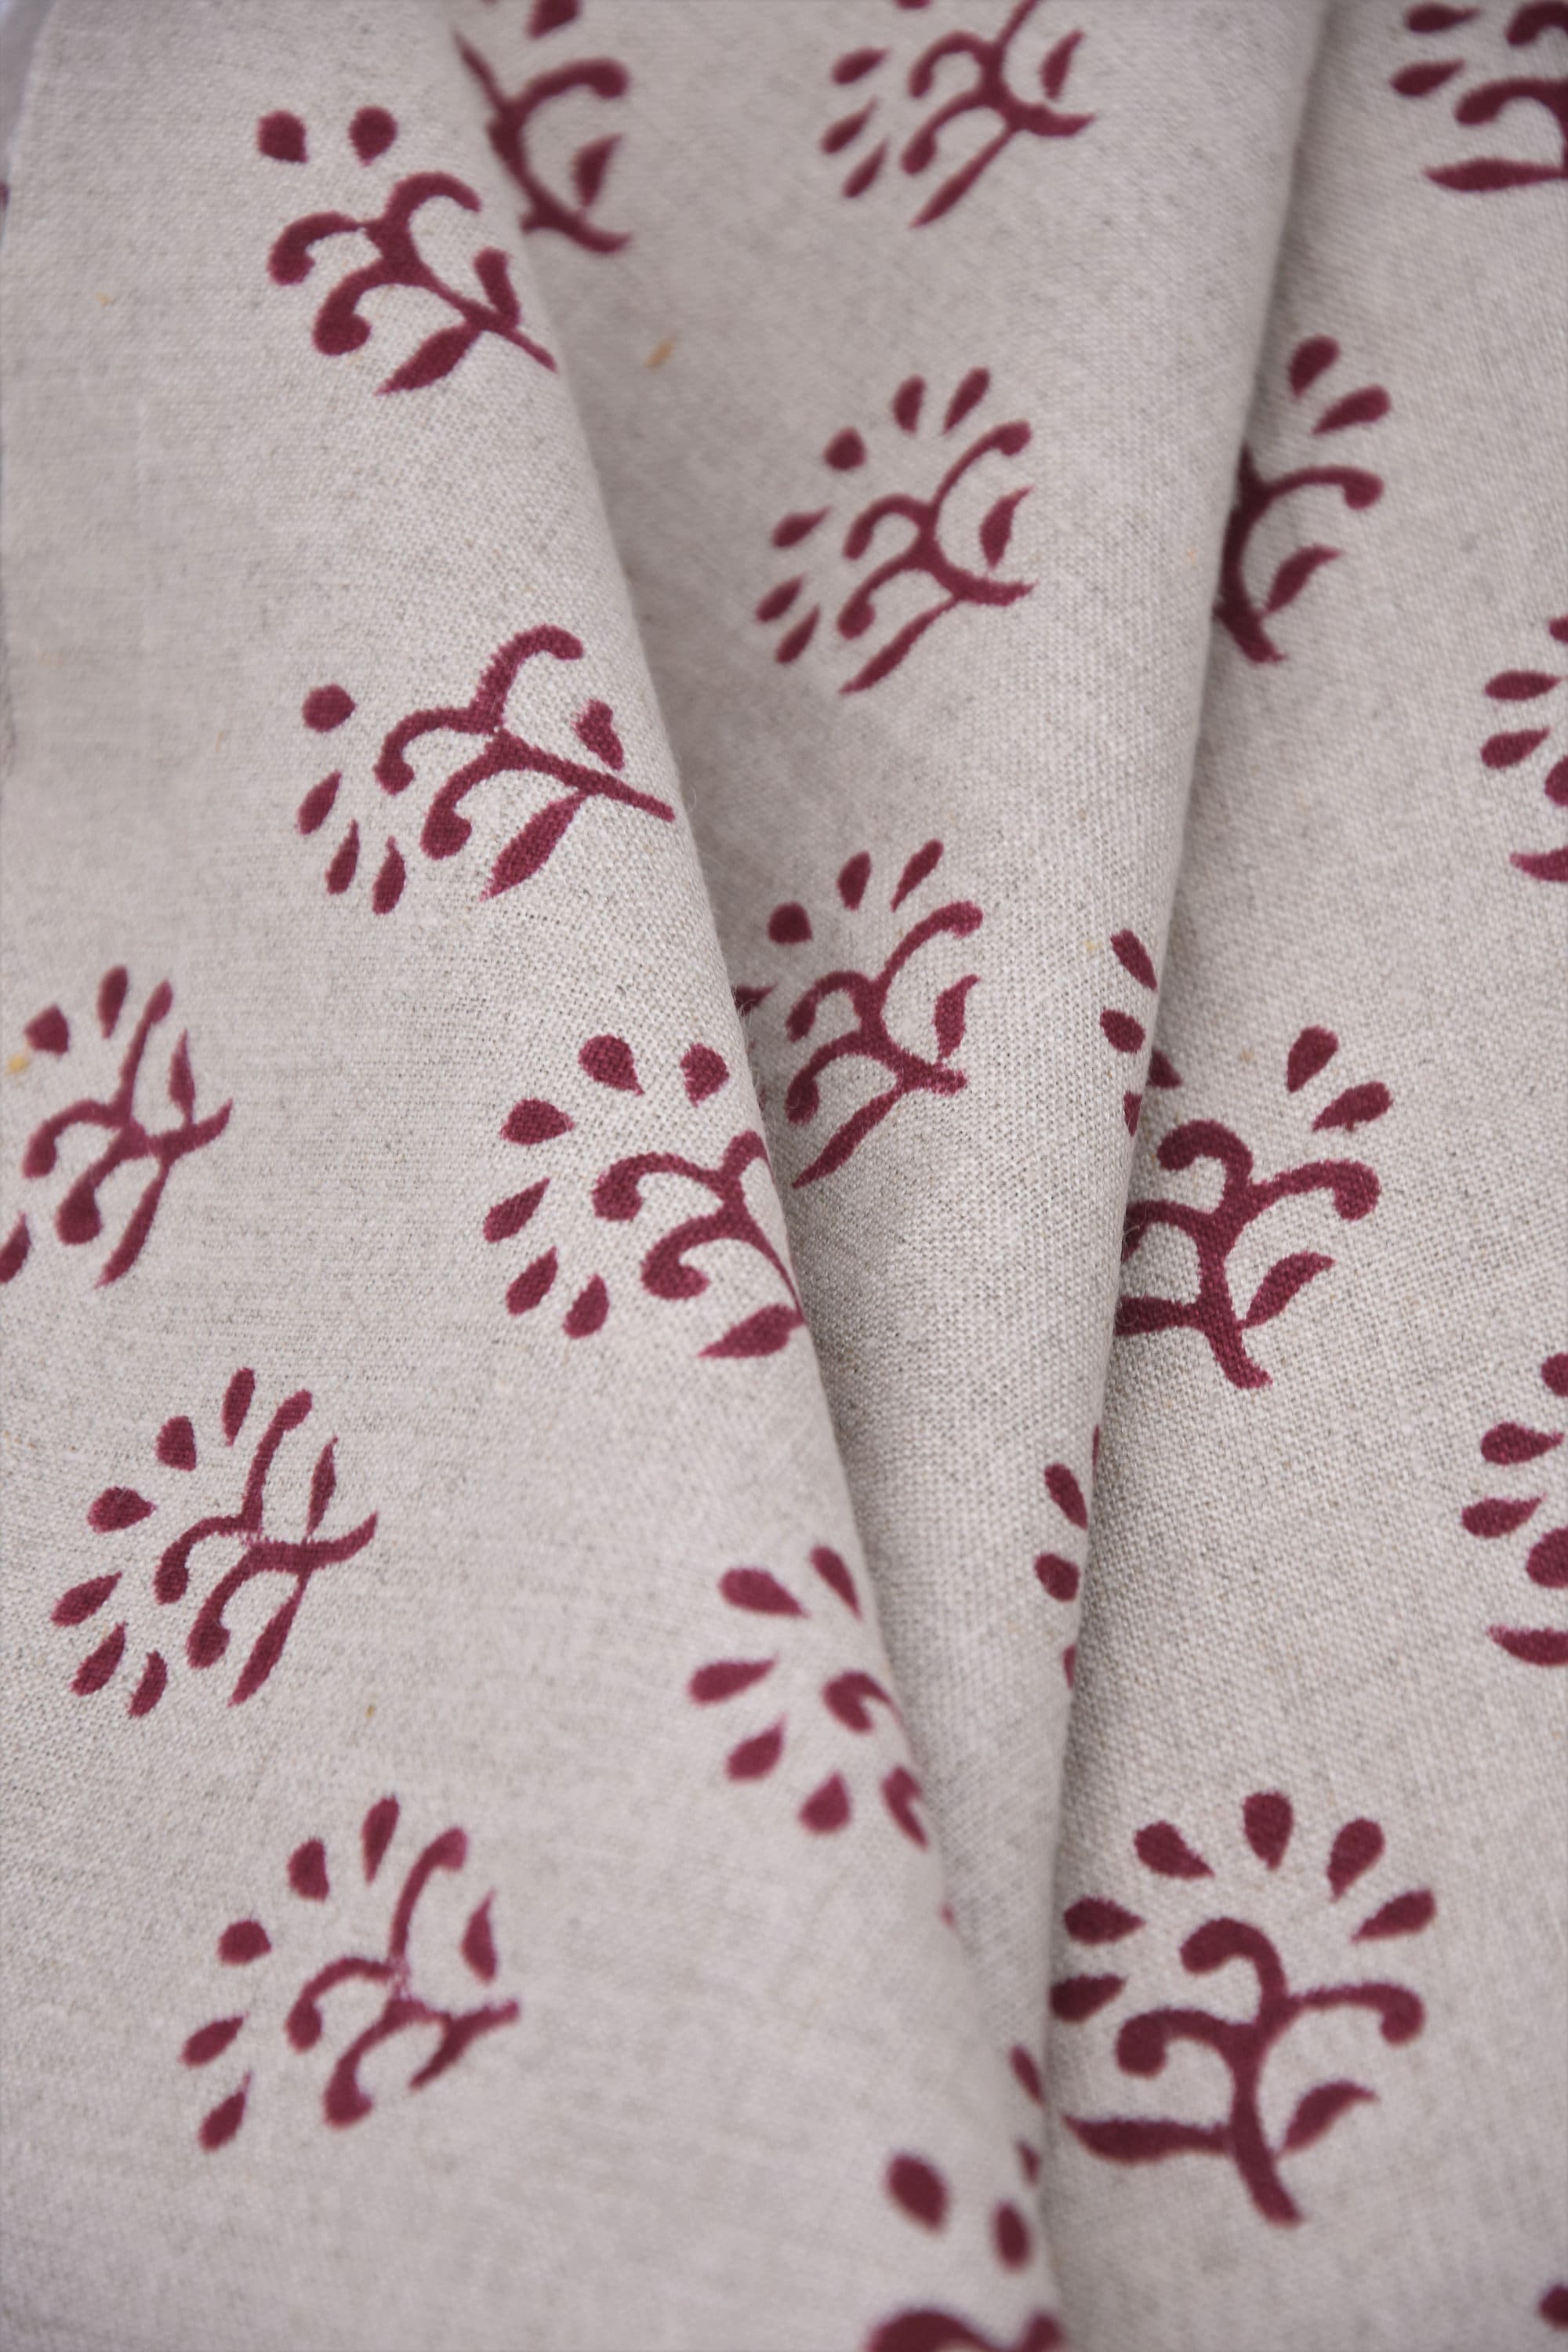 Block print pure linen 58" Wide, Indian Fabric, floral fabric, Linen by yard, upholstery handloom pillow covers - Shivri